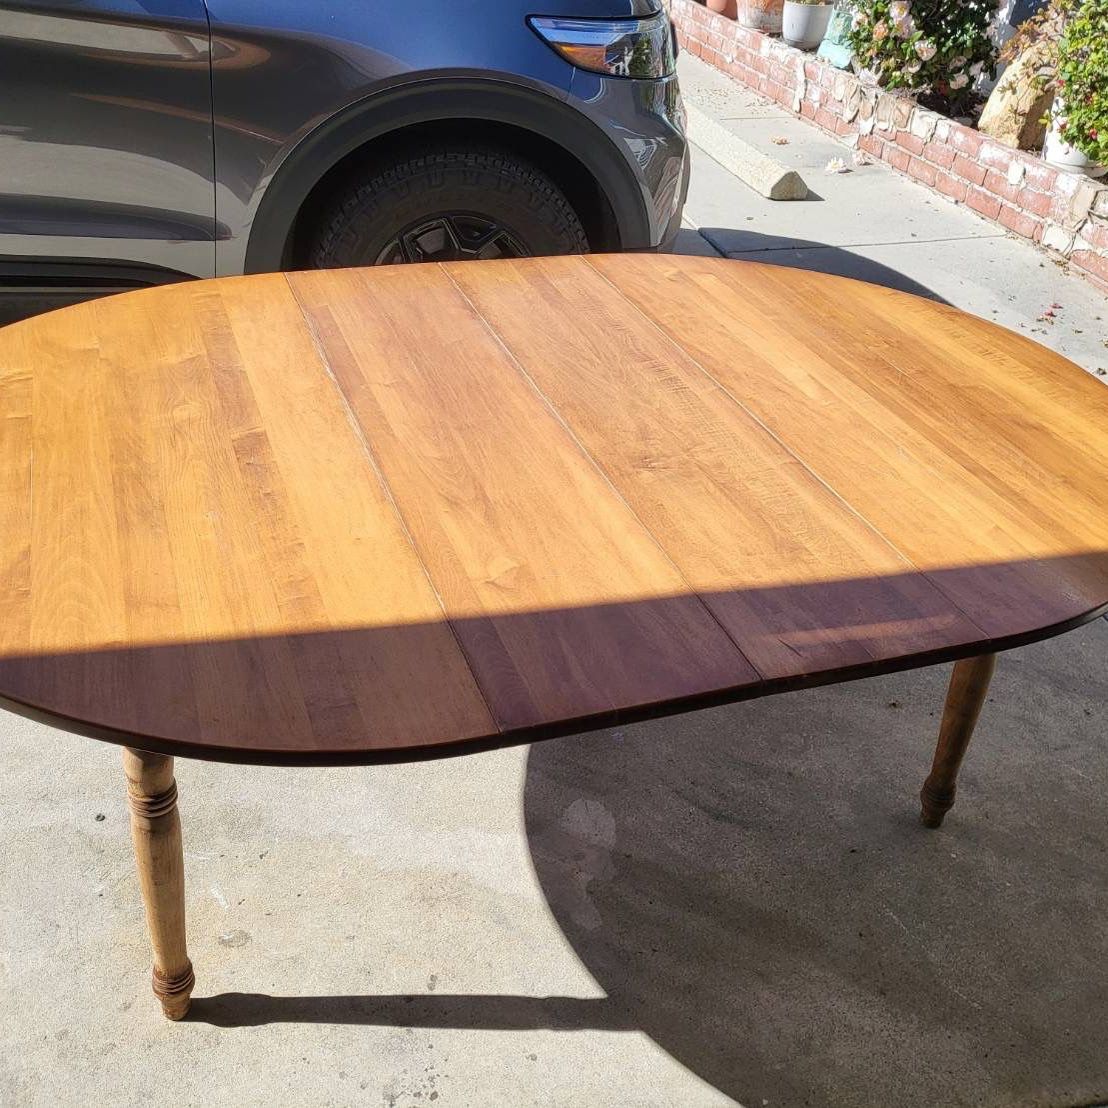 Vintage Dining Table Maple Wood With Planks